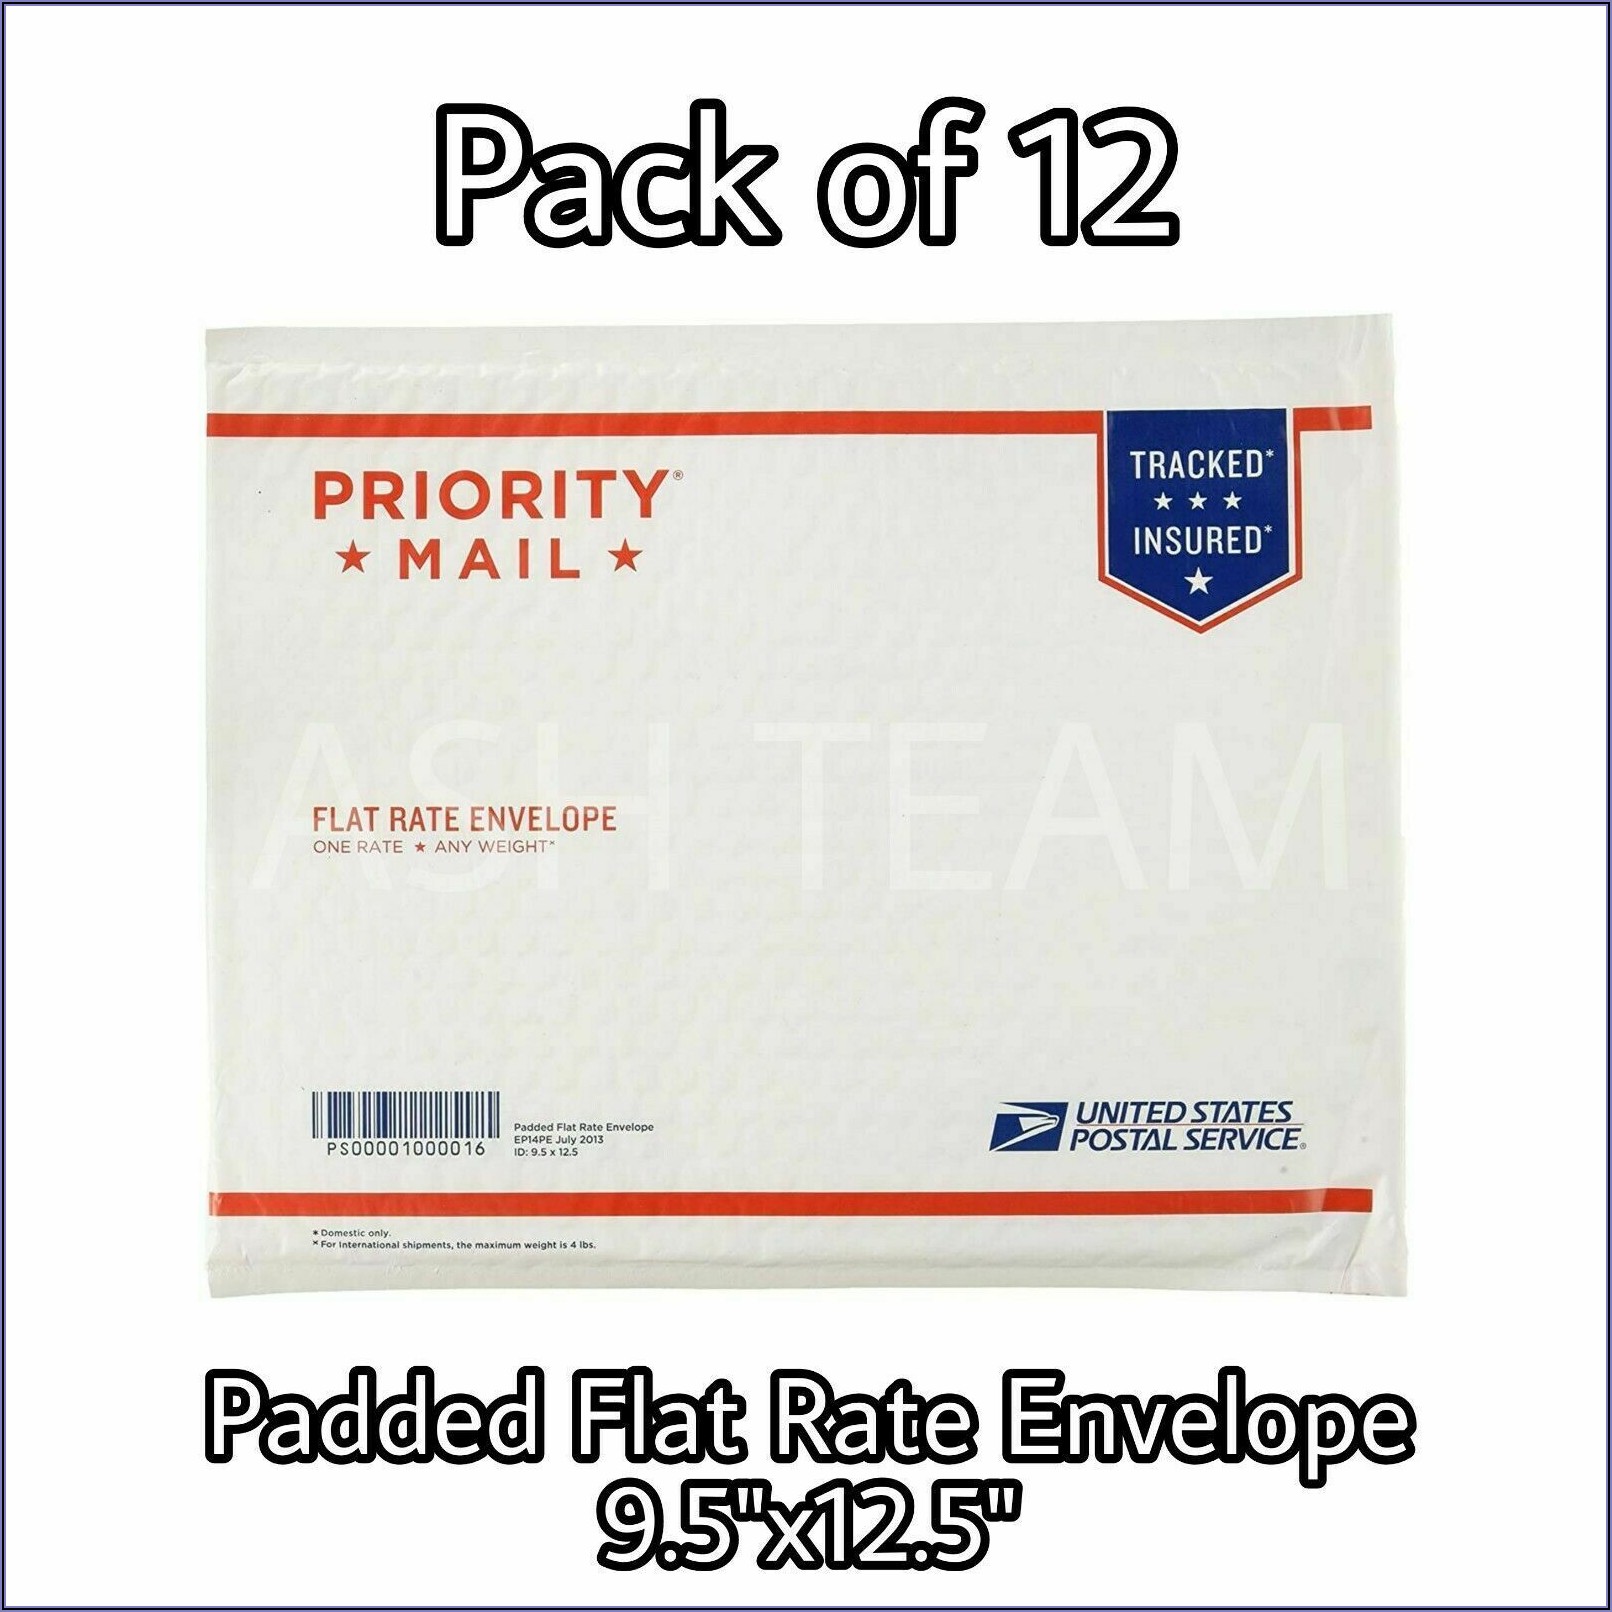 how much is a flat rate envelope priority mail?